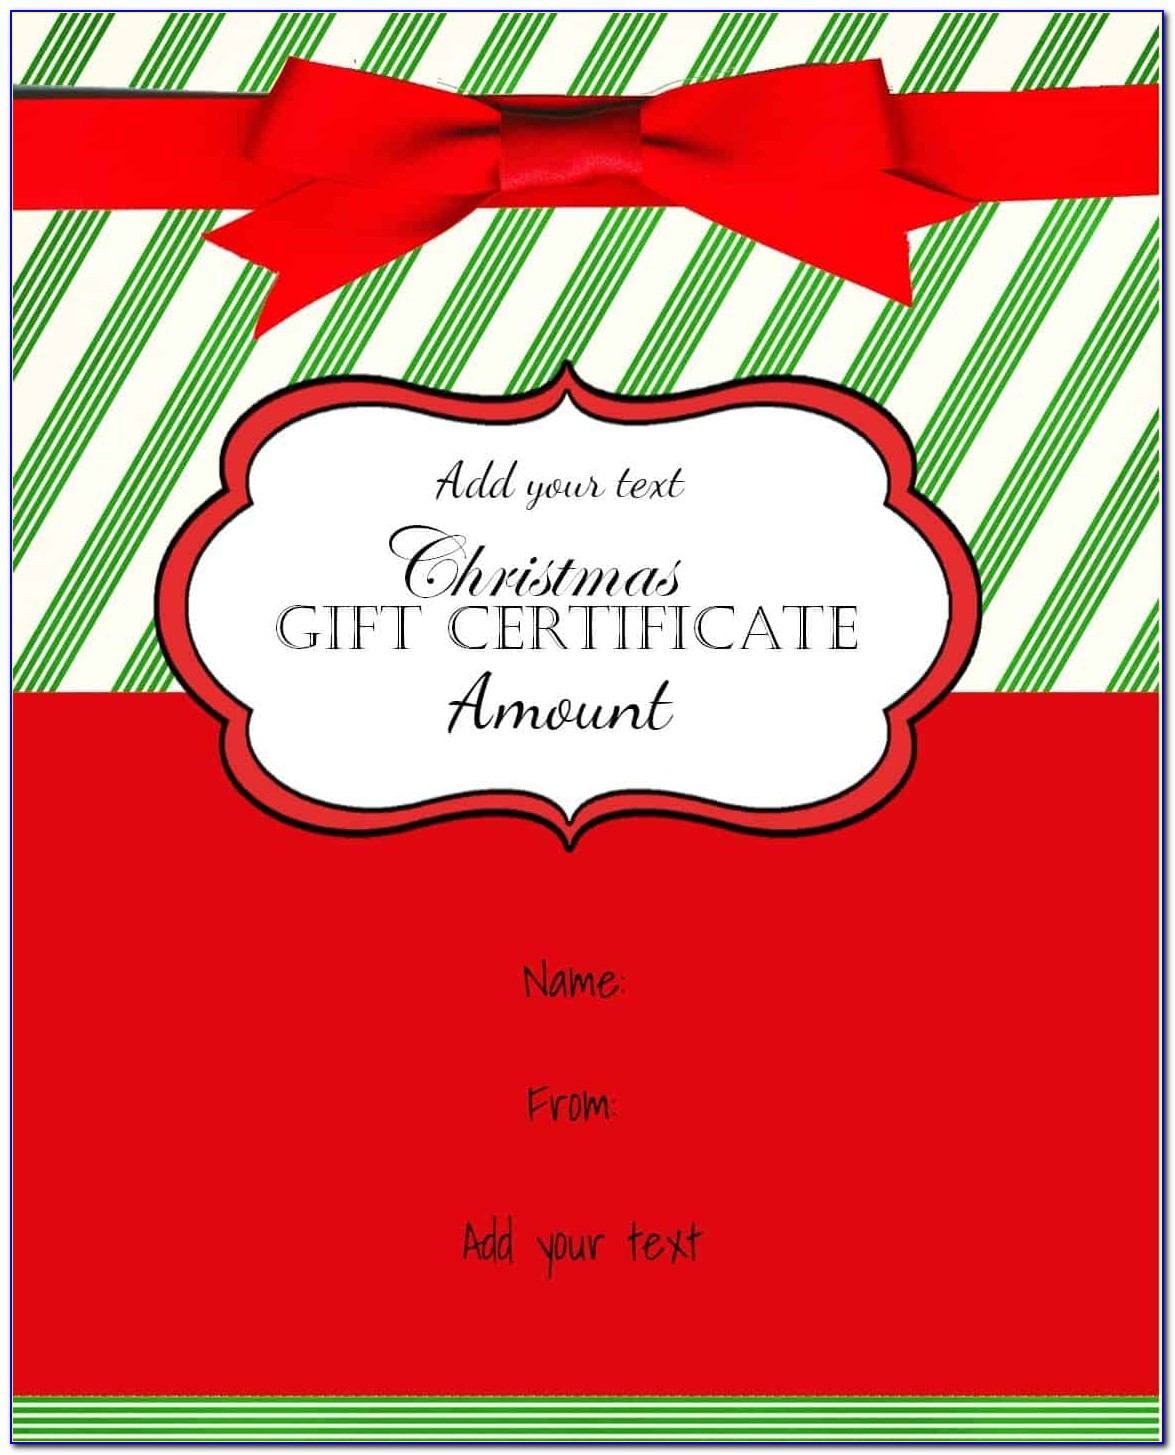 Free Christmas Gift Voucher Templates Download